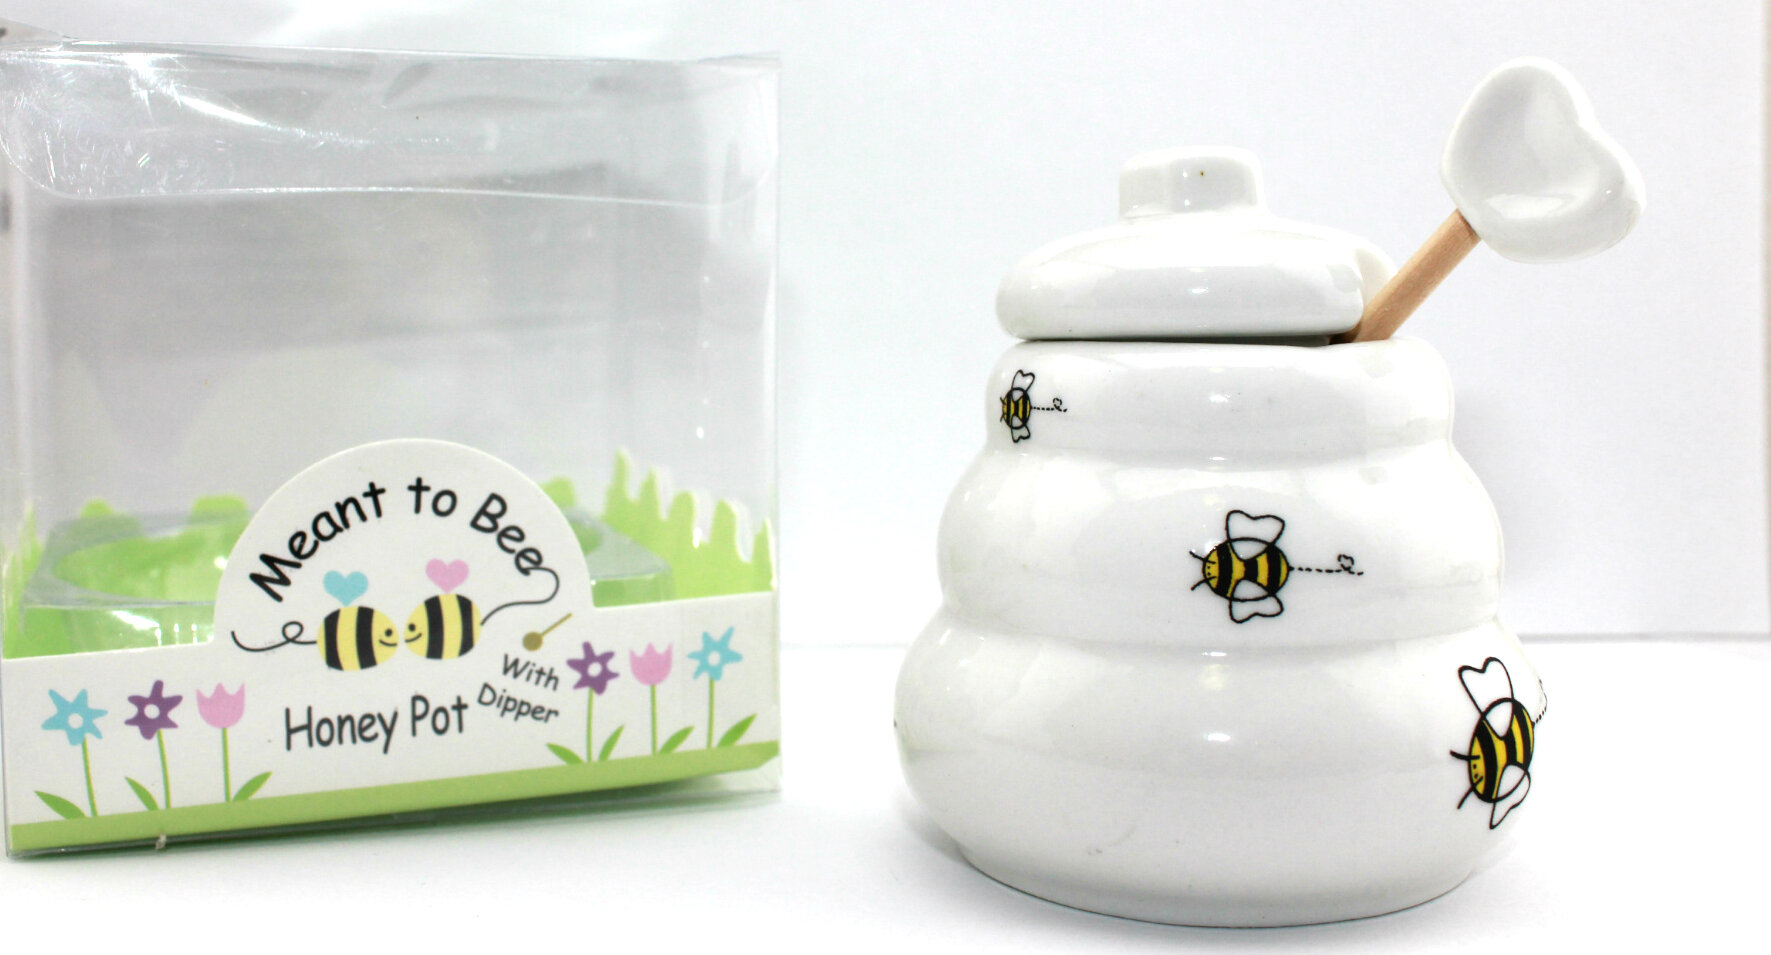 Meant to Bee Honey Pot $4.95